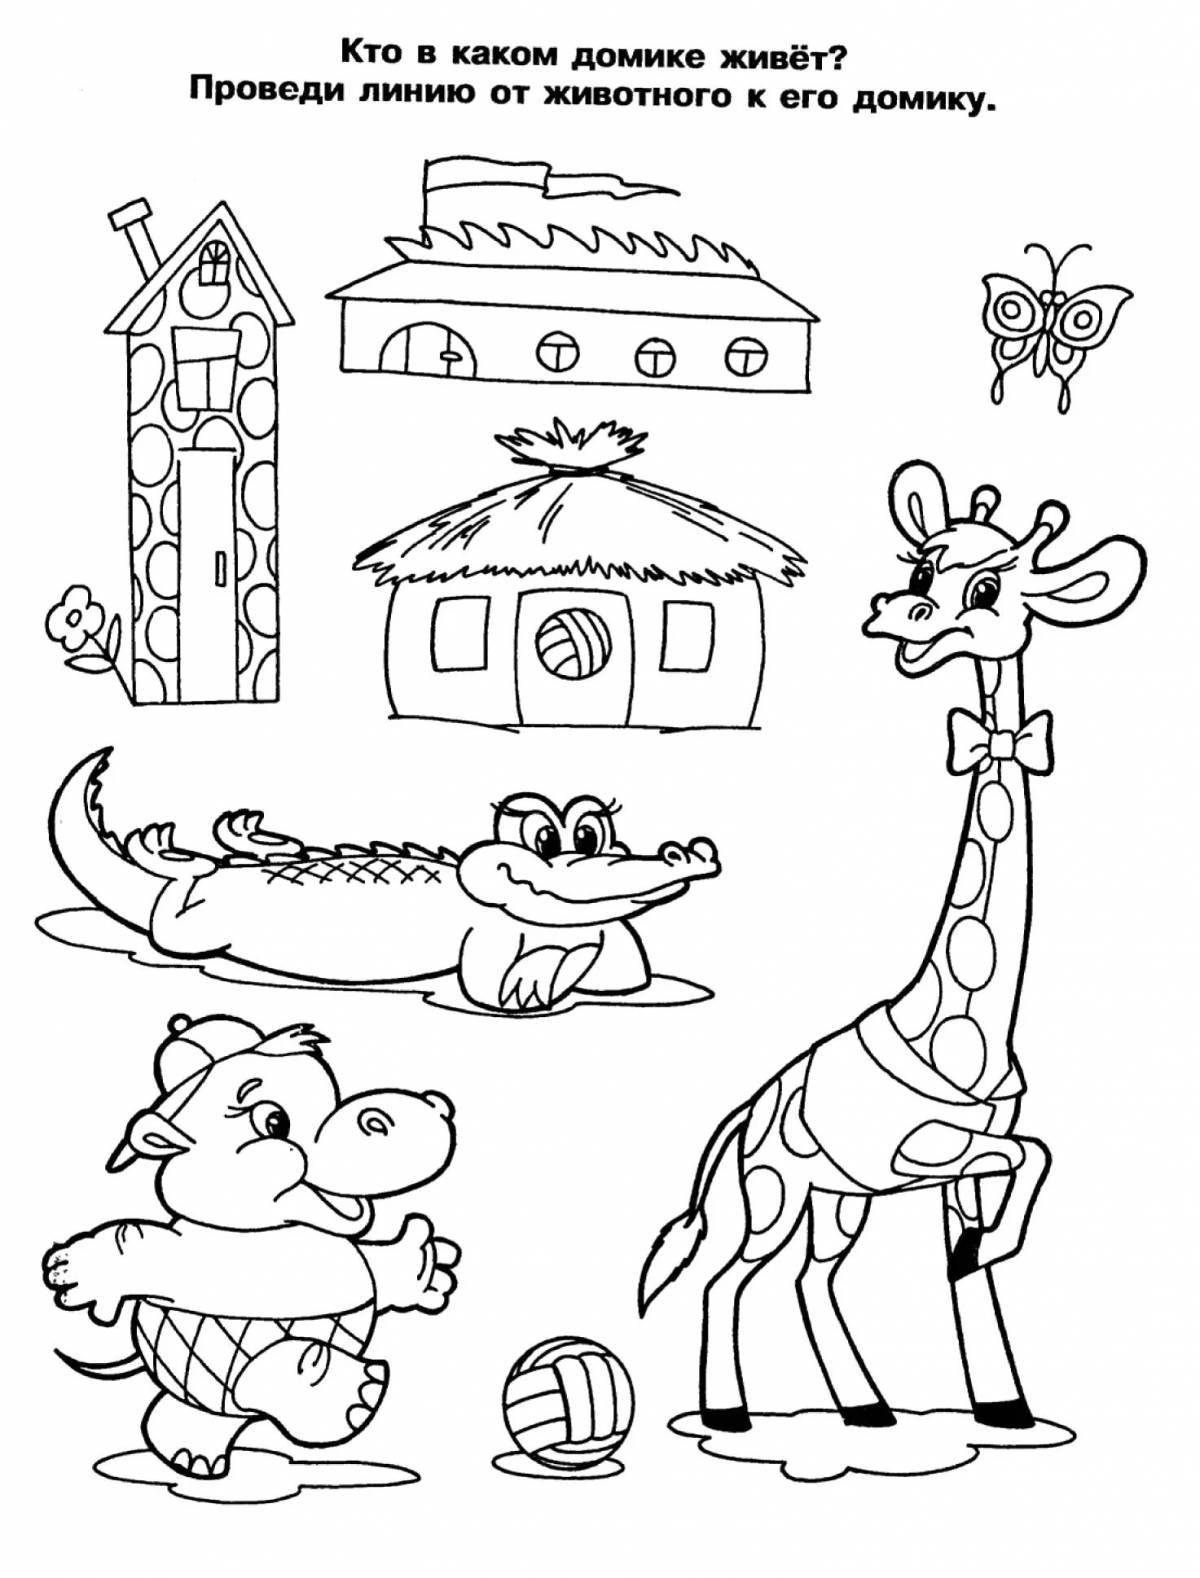 Educational logical coloring for children 6-7 years old